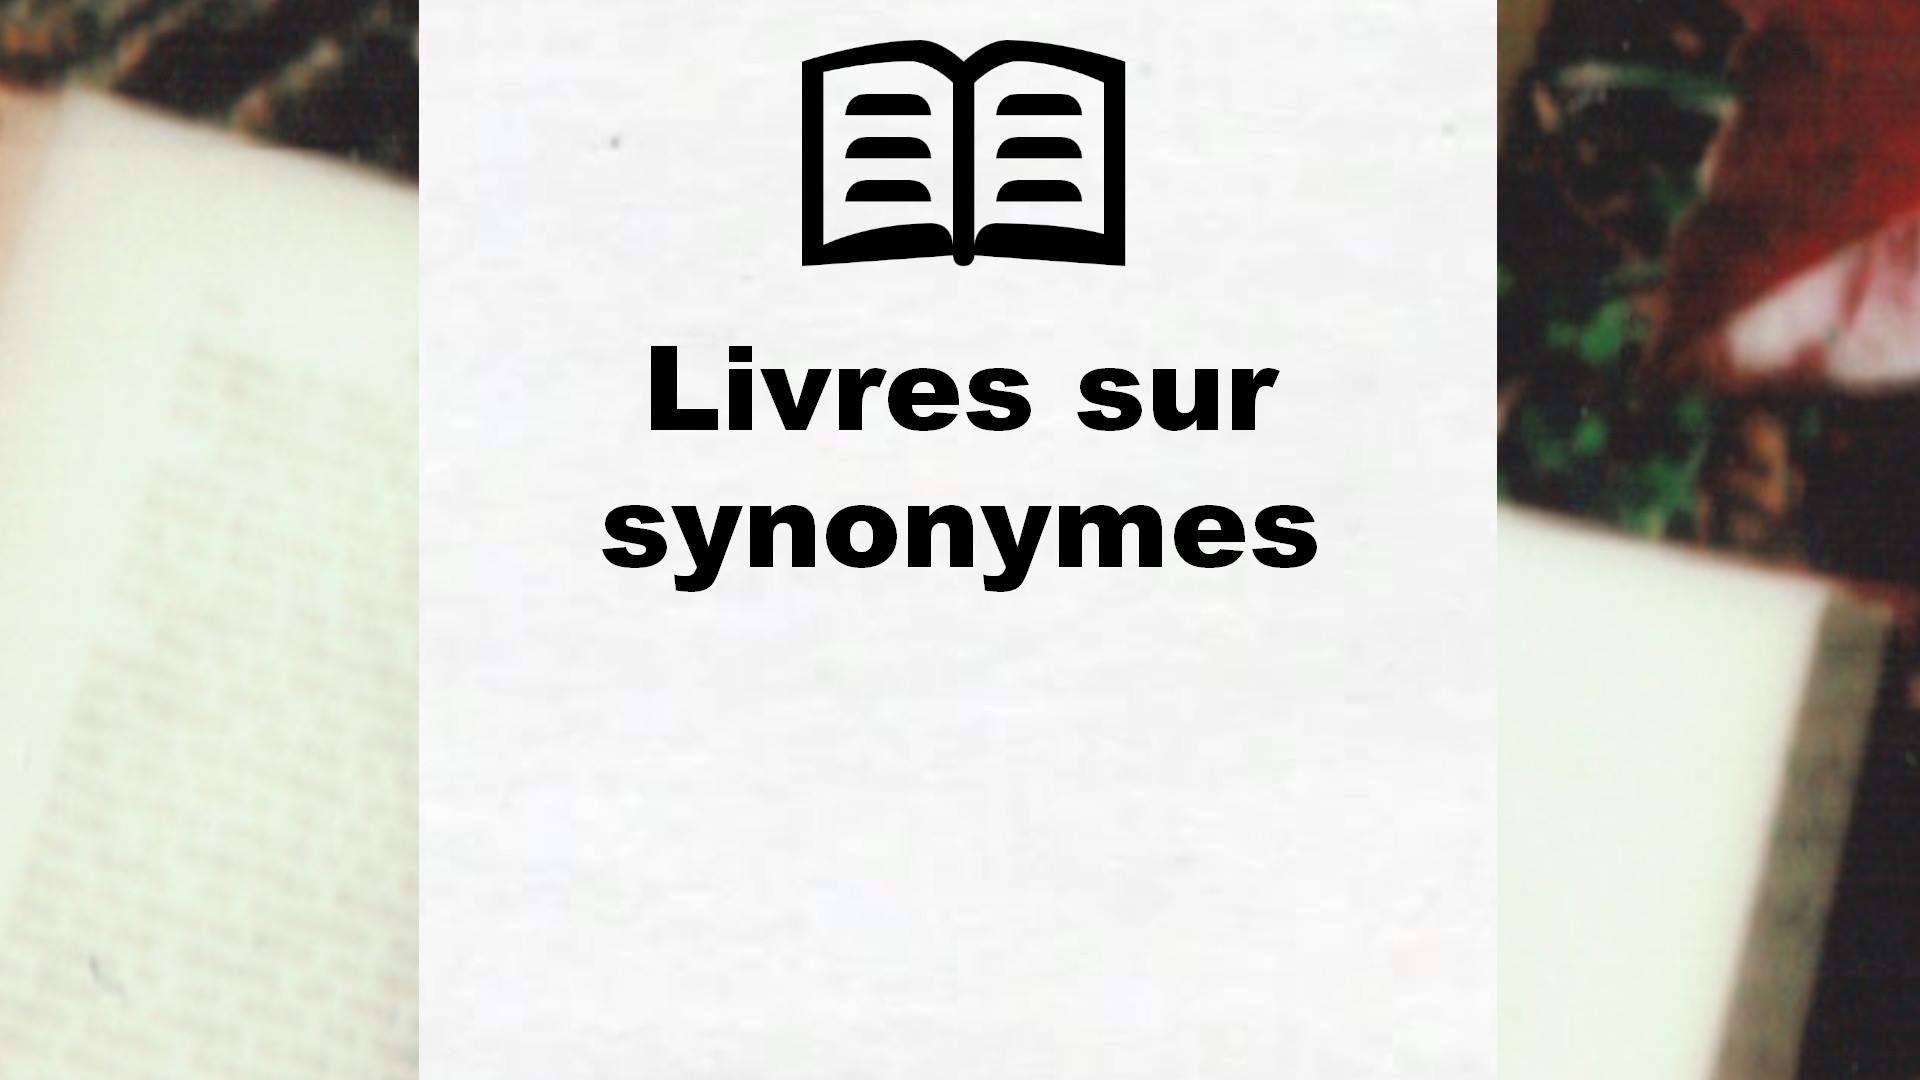 Livres sur synonymes